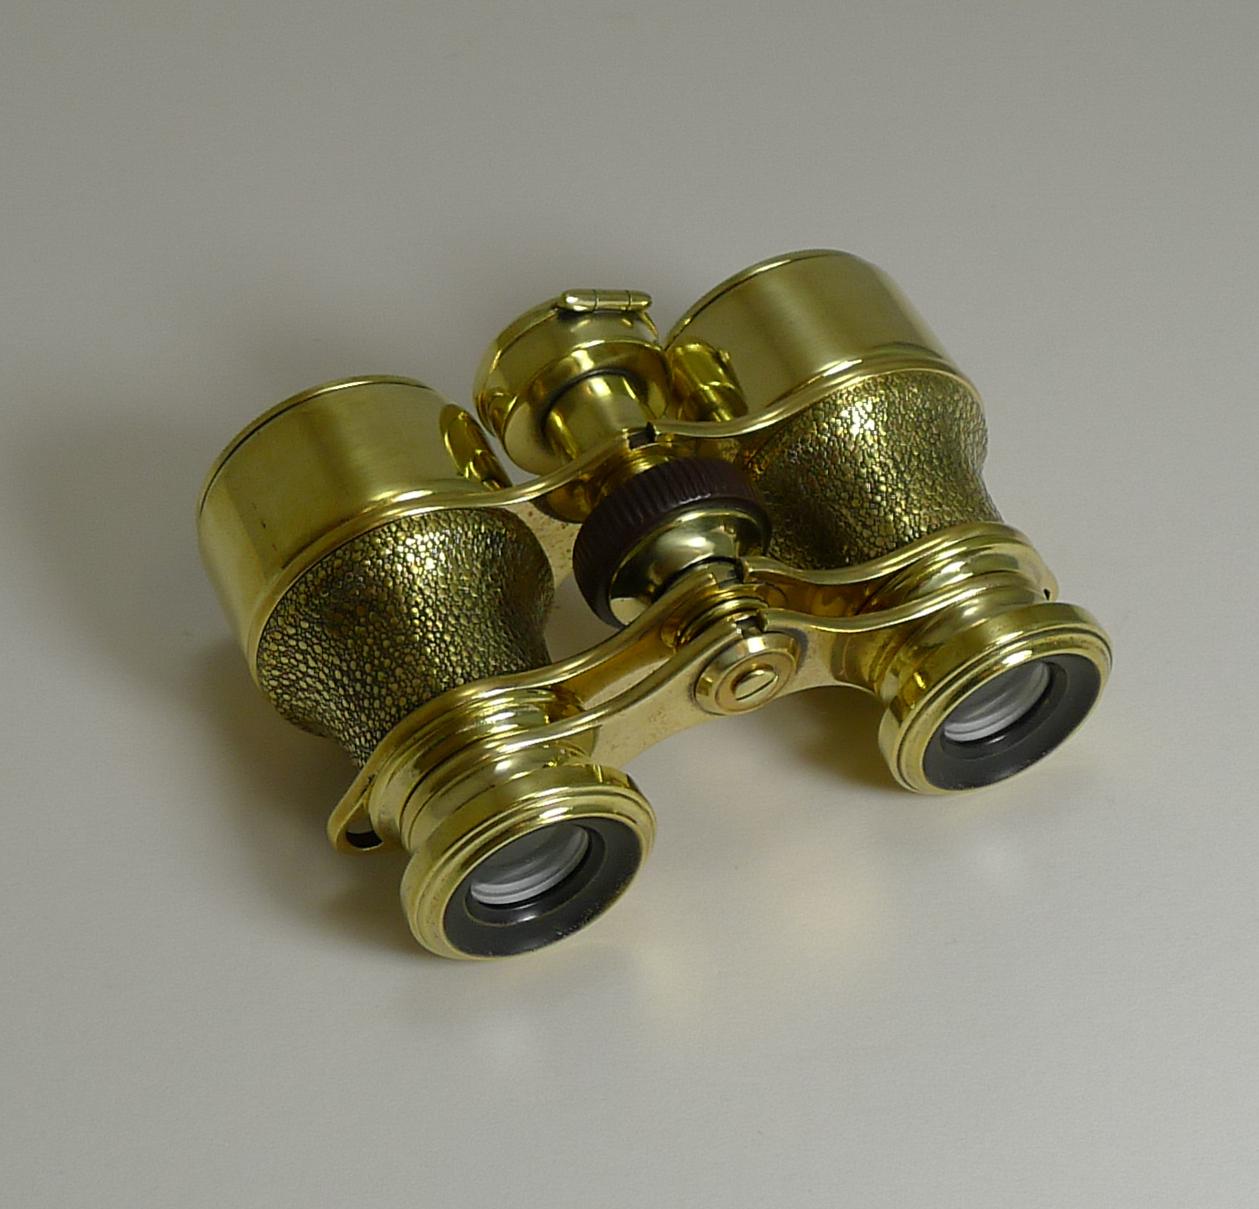 Edwardian Antique English Field Glasses / Binoculars by Lawrence and Mayo - With Compass